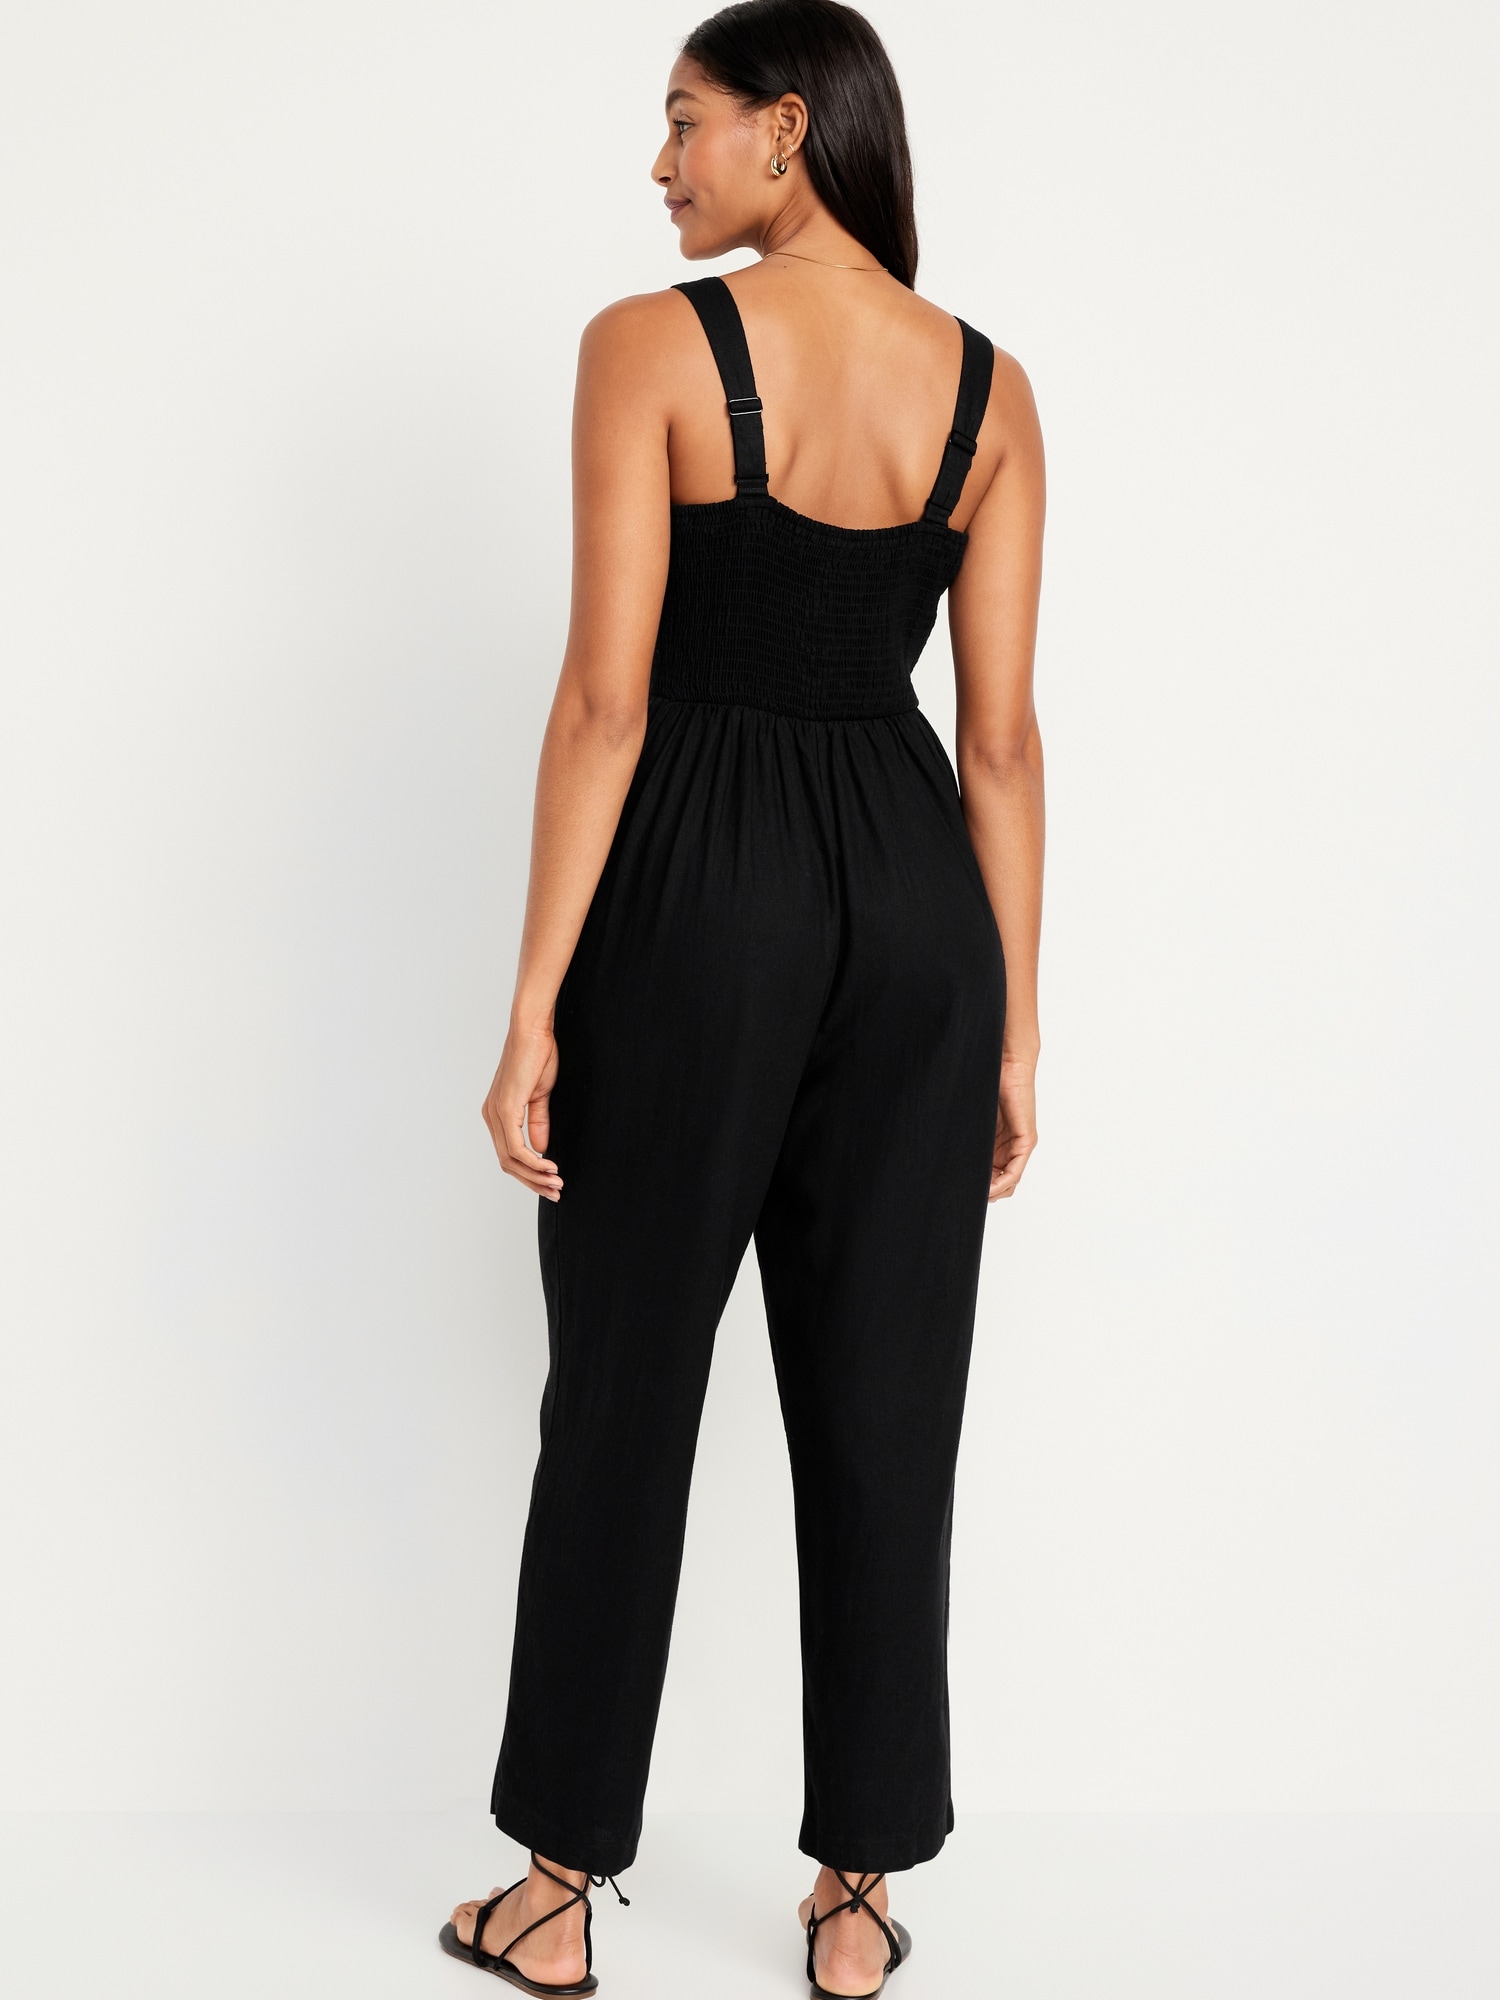 Fit & Flare Cami Jumpsuit | Old Navy